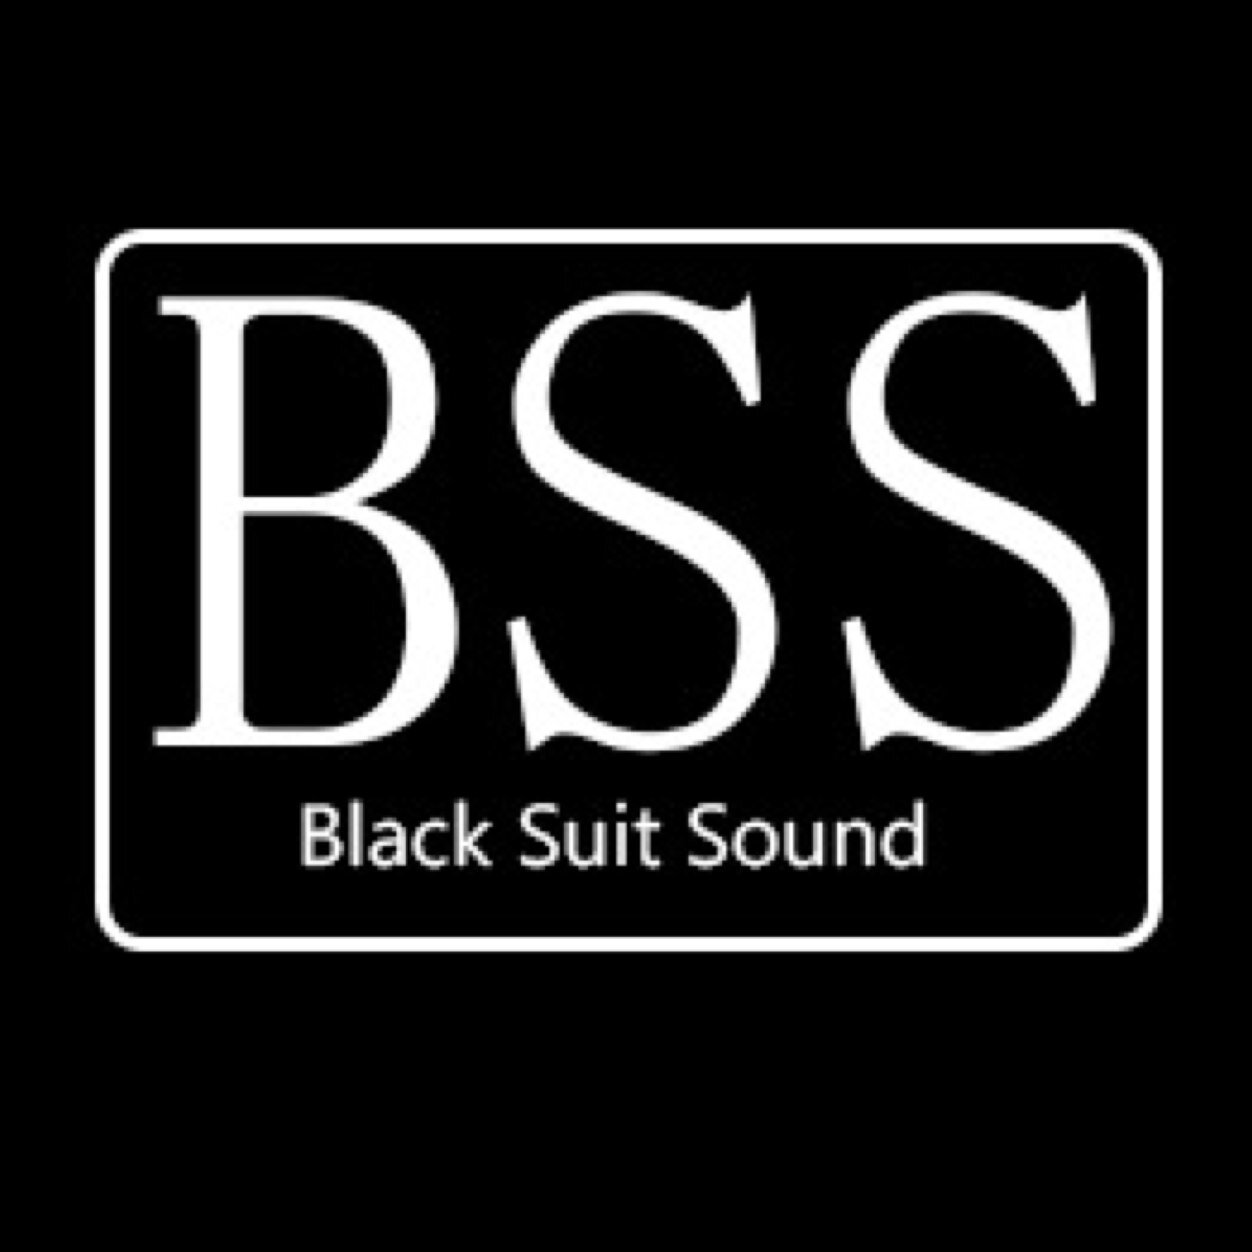 Vancouver Based Production company Recording, Mixing & Mastering. Business Enquiries: BlackSuitSound@gmail.com